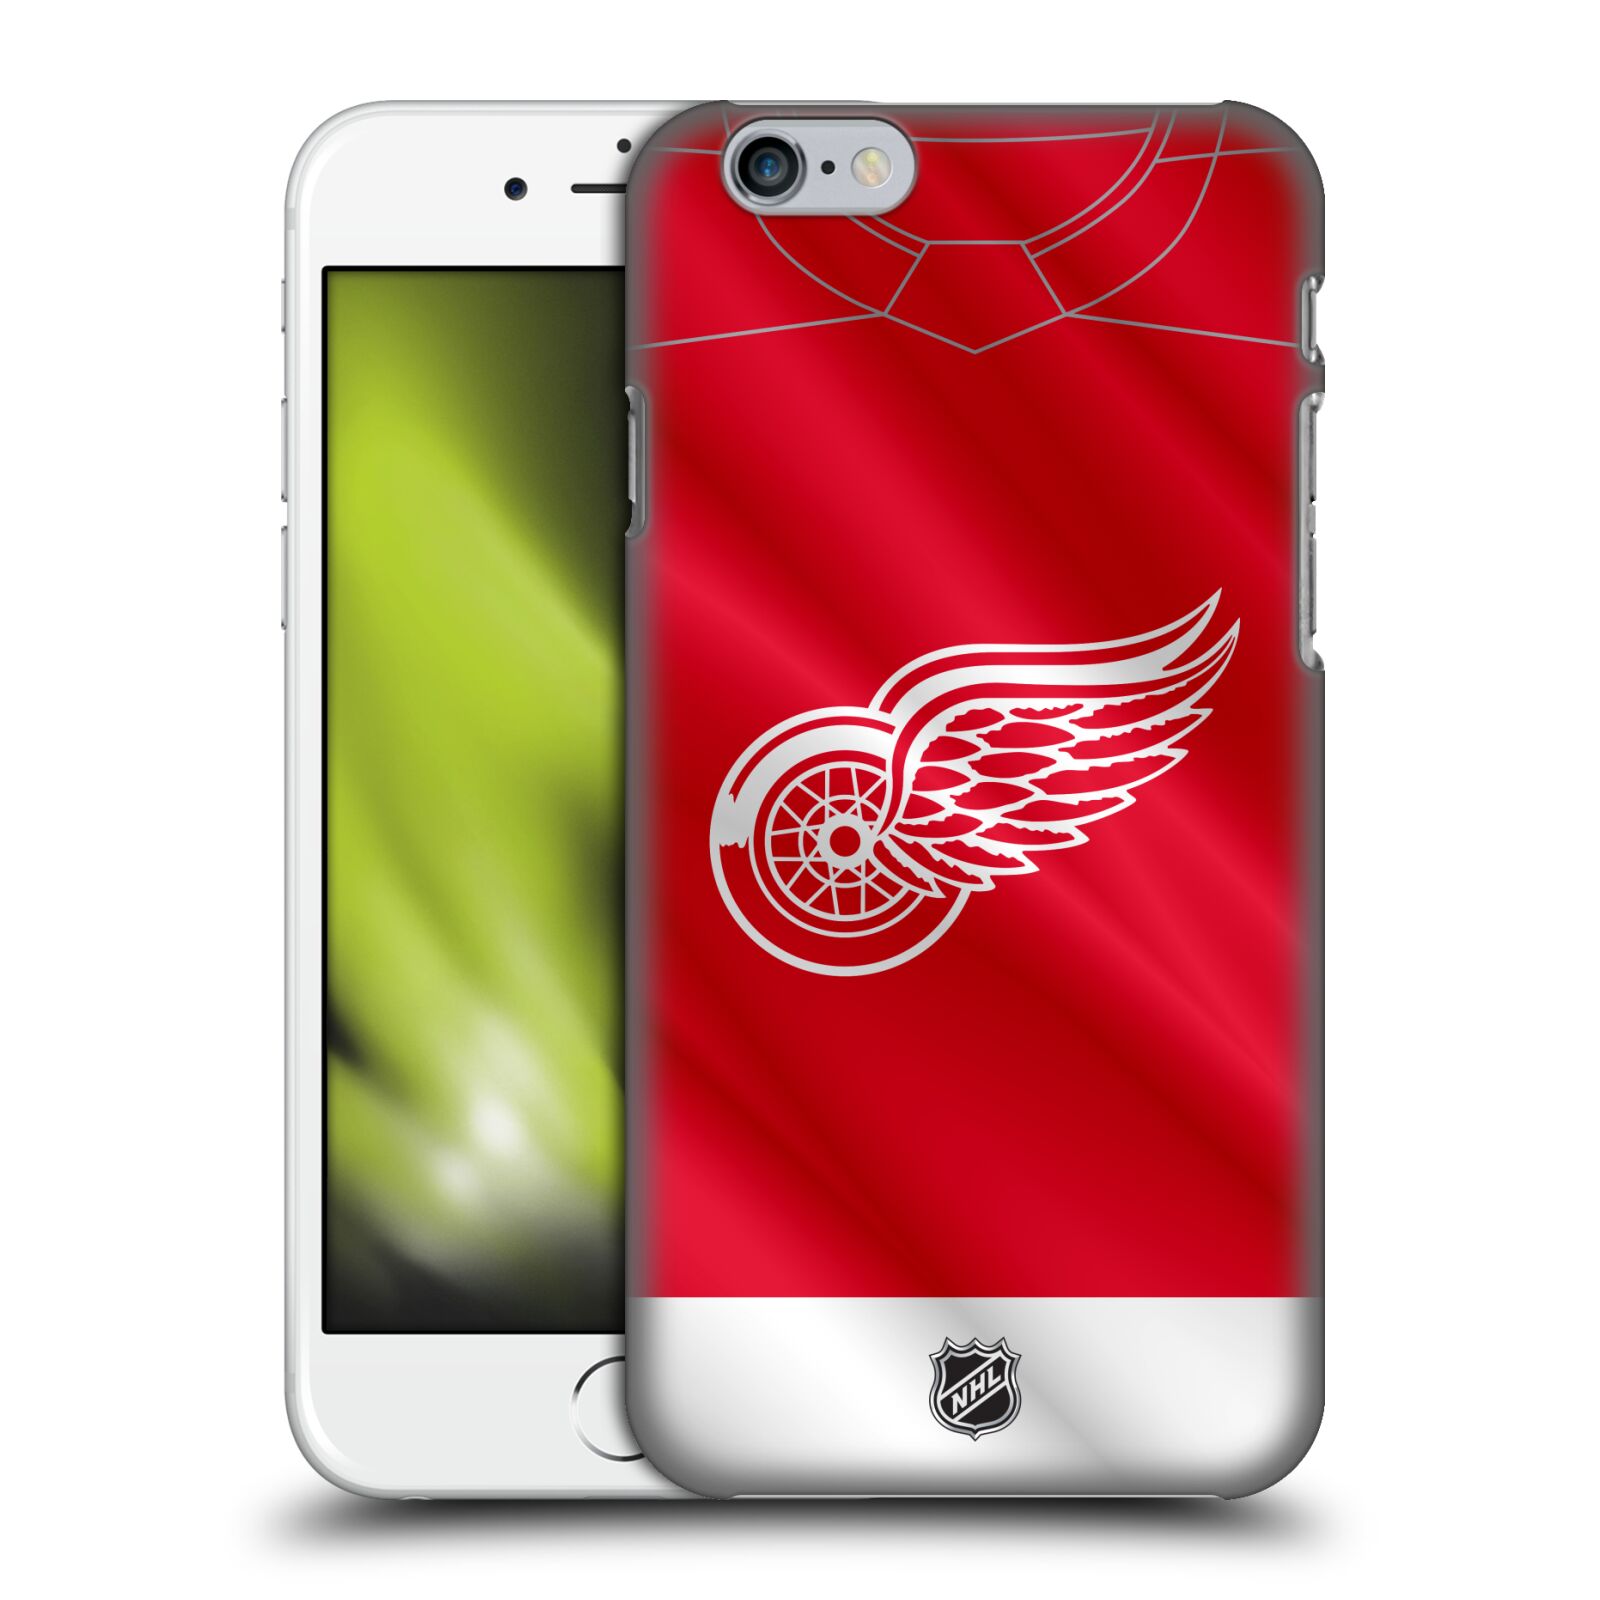 Pouzdro na mobil Apple Iphone 6/6S - HEAD CASE - Hokej NHL - Detroit Red Wings - Dres